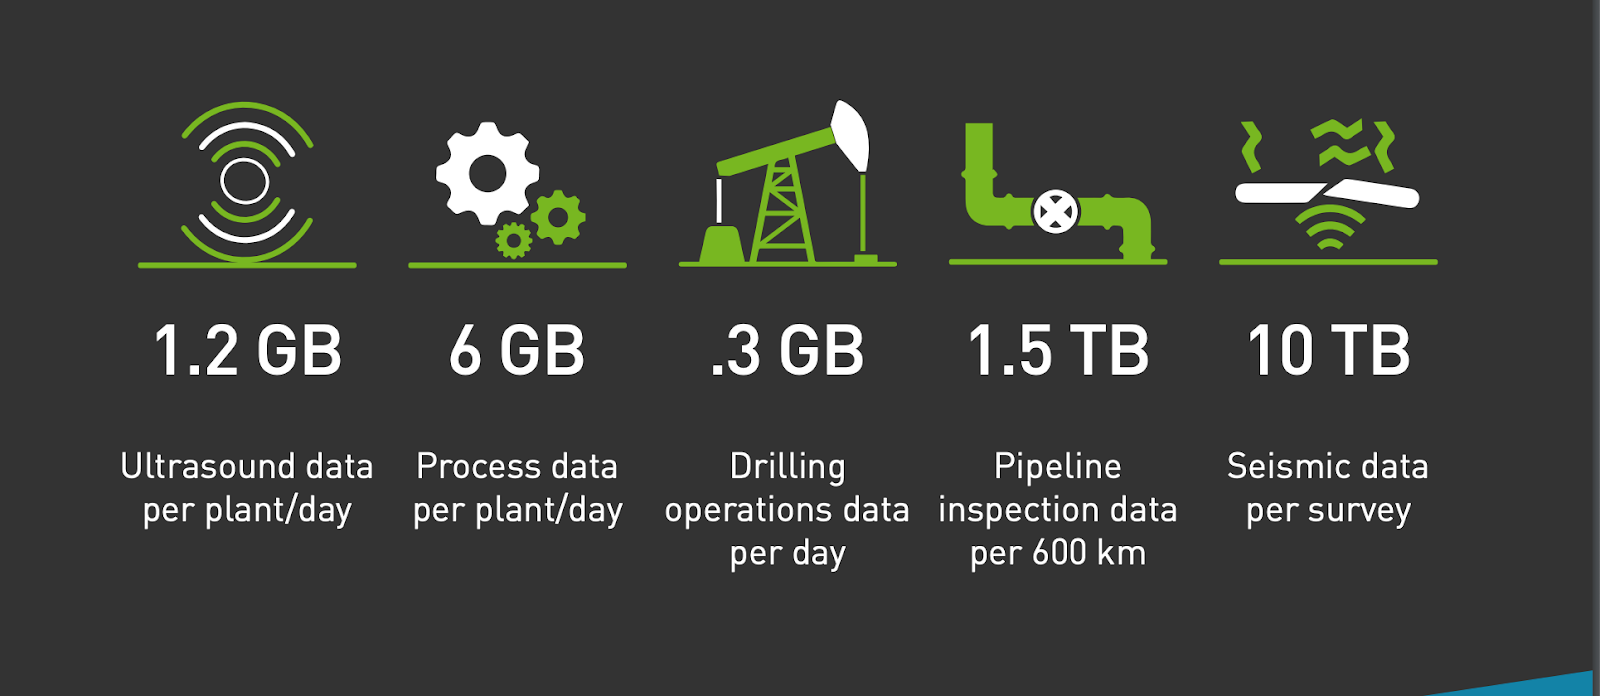 Operational data produced daily by industry